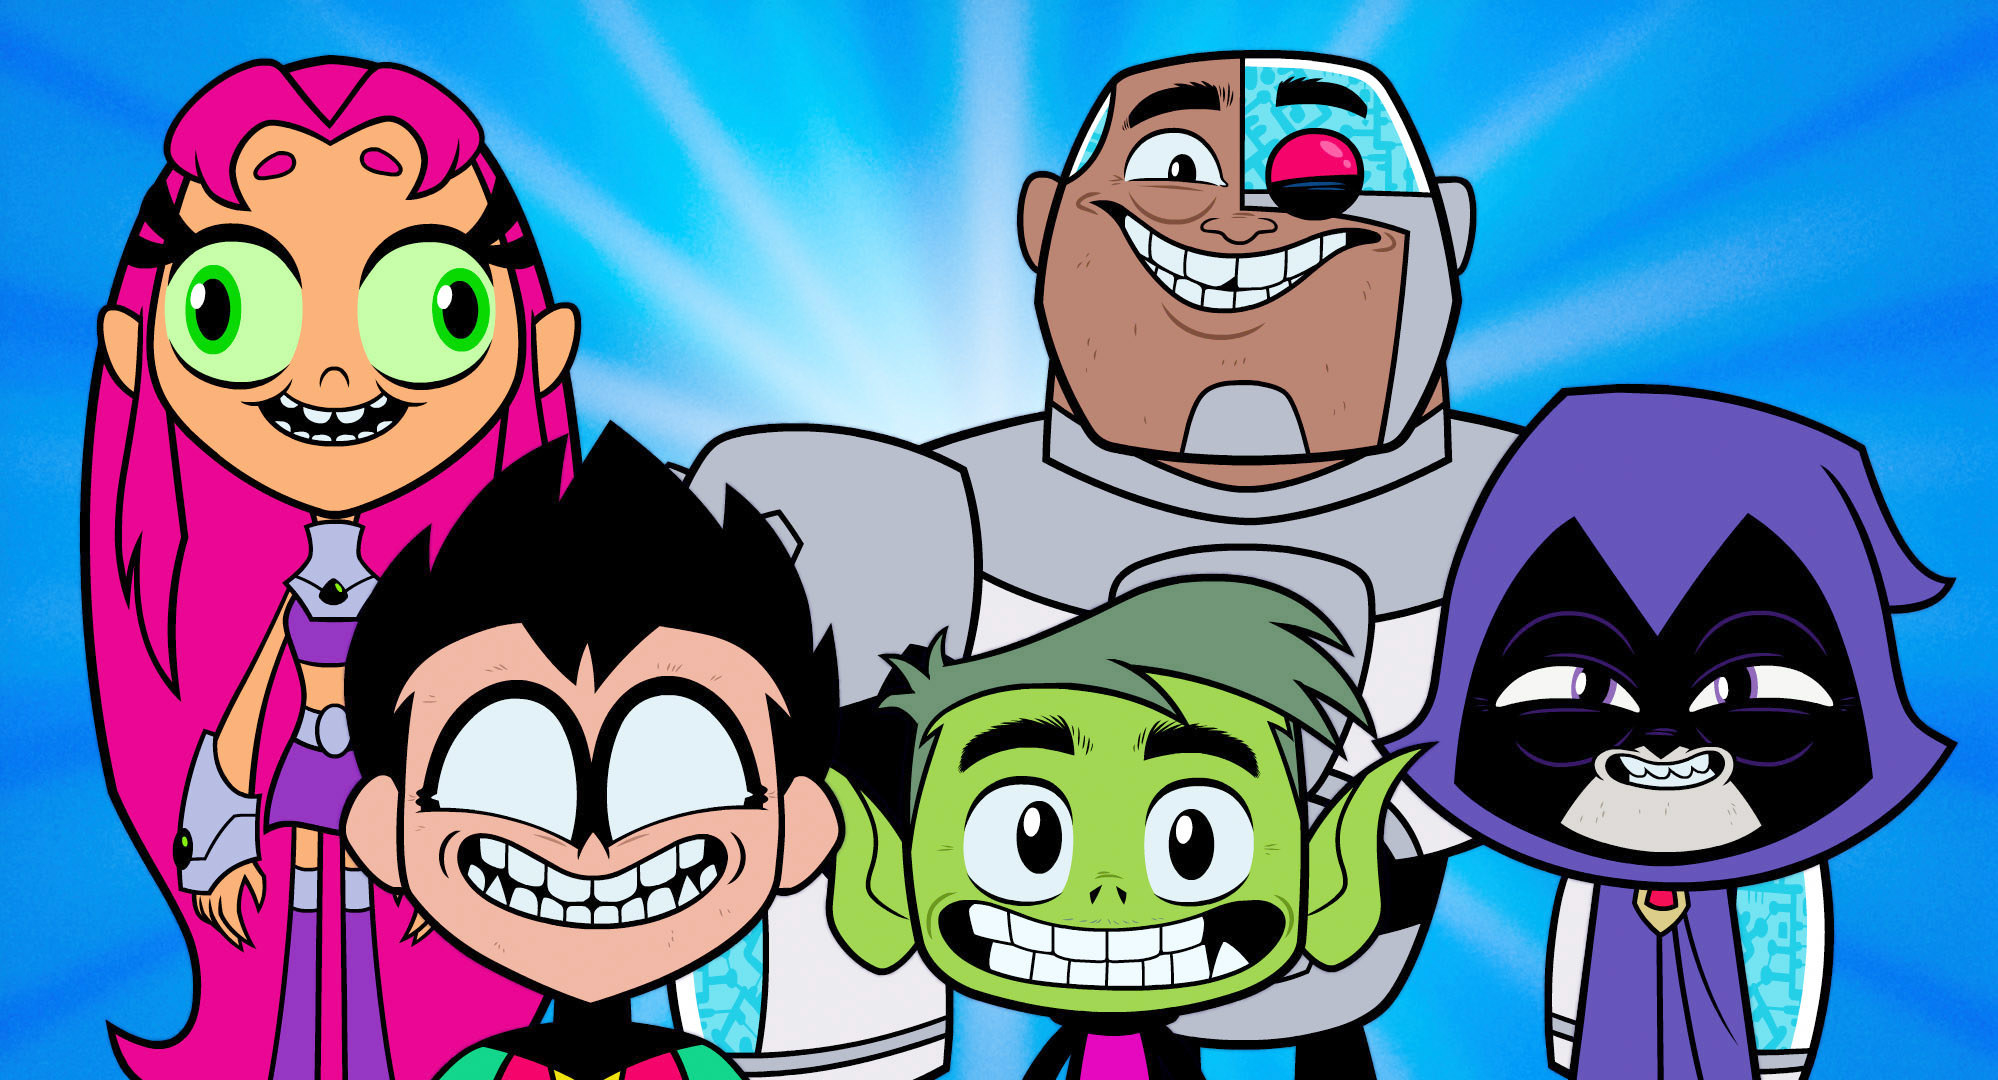 Picture of Teen Titans Go! cast smiling goofily, from left: Starfire, Robin, Cyborg, Beast Boy, Raven